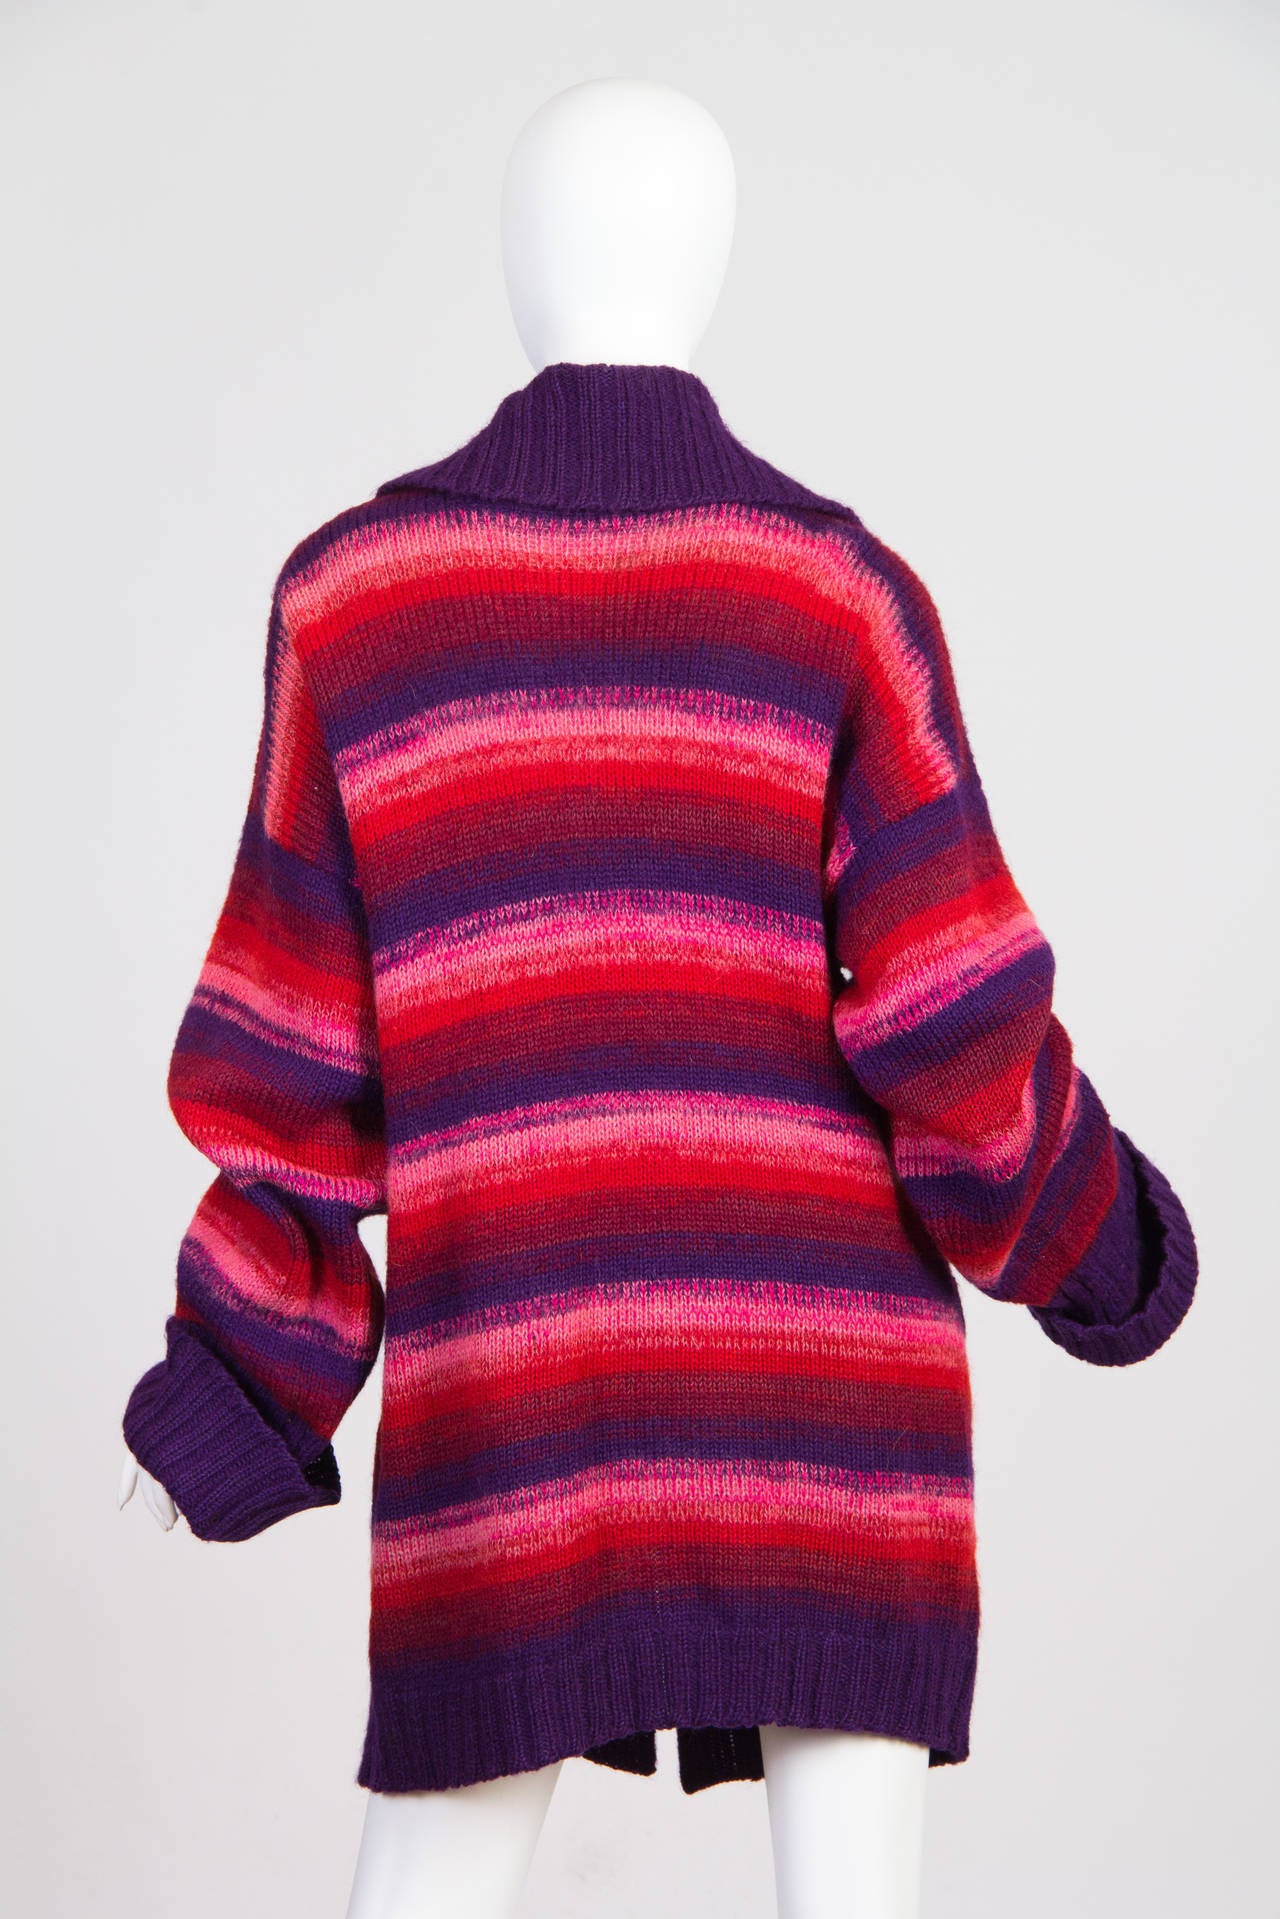 purple and green striped sweater